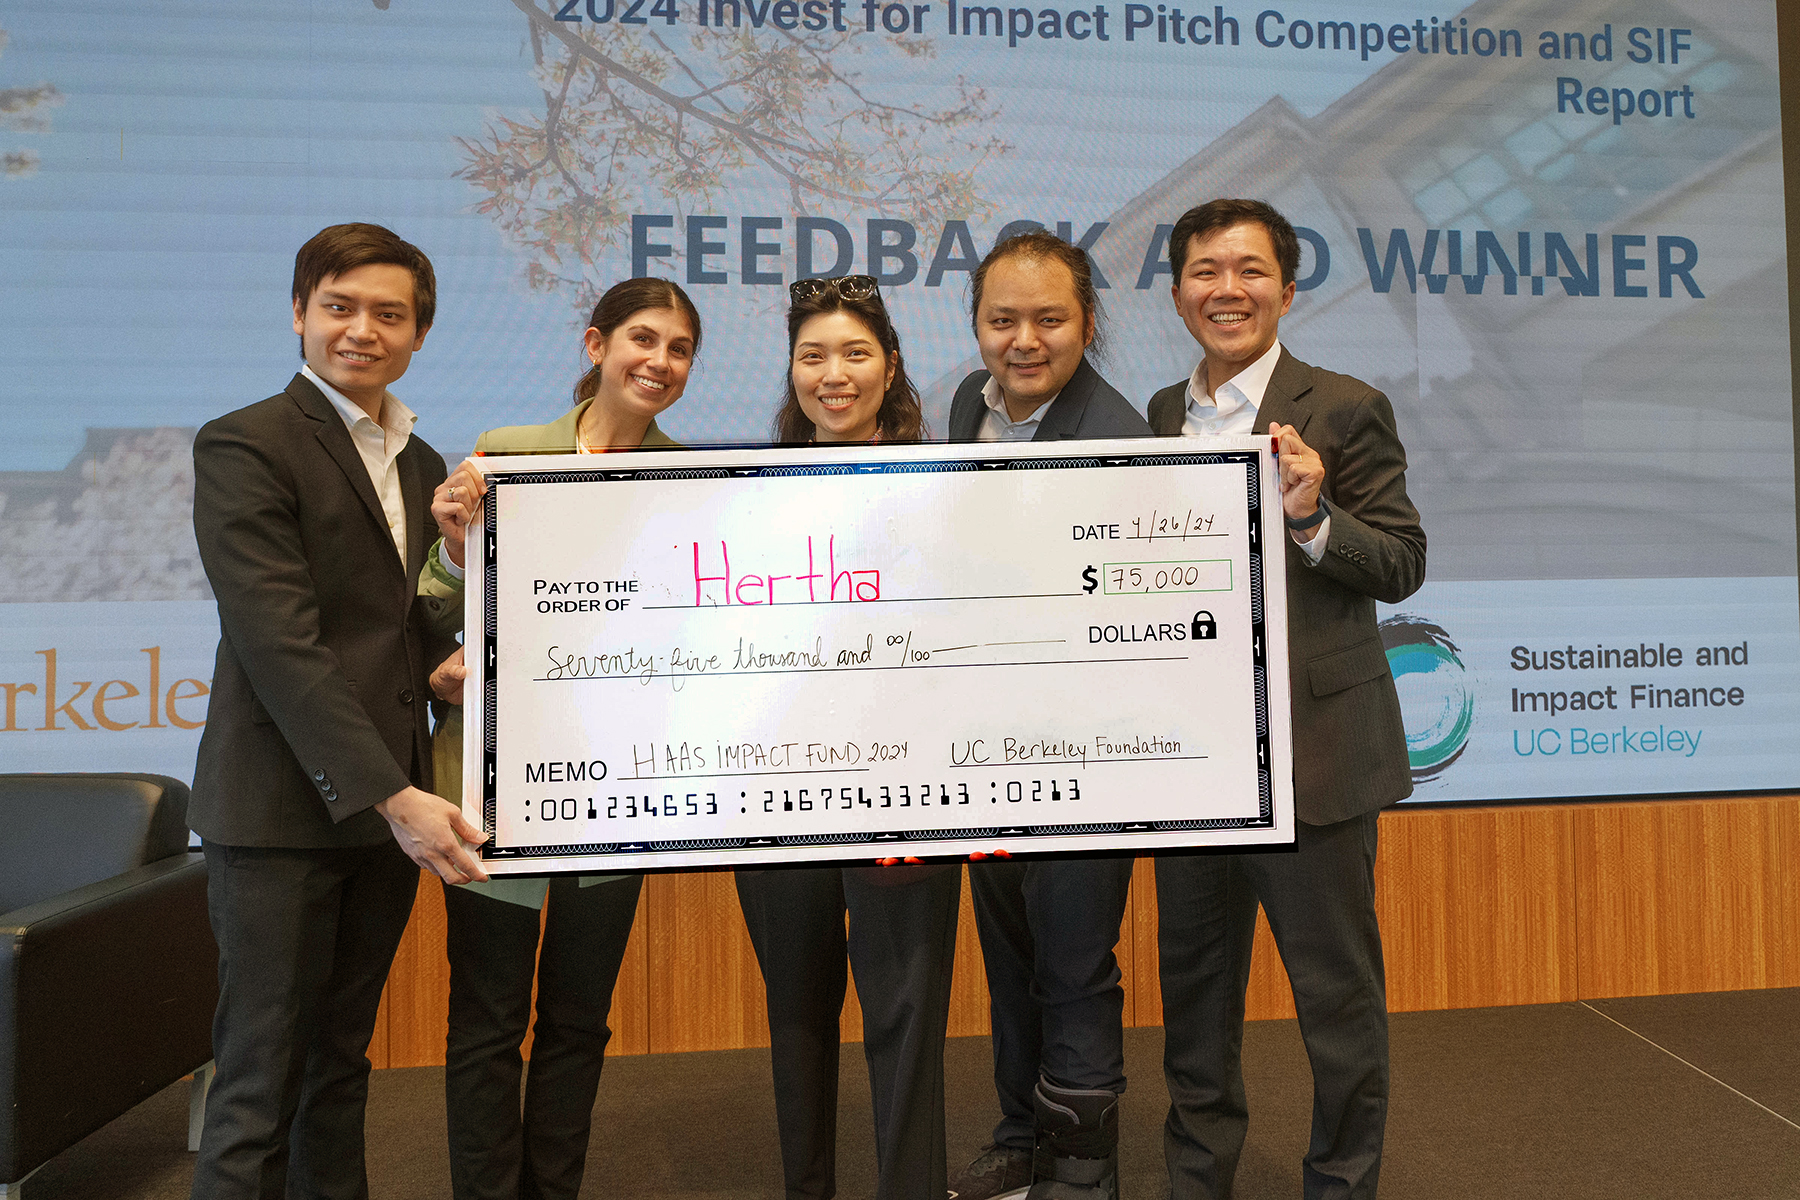 The final winning team, pitching on behalf of startup Hertha Metals, including Korawat Techaphulphol, MBA 24, Hillary Hoffstein, MBA 24, Jeep Kline, Professional Faculty of the Haas Impact Fund Course, Junhua Wei, EWMBA 25, and Tatsuya Toyoda. (Team member not pictured Lucian Sweitzer, EWMBA 24).